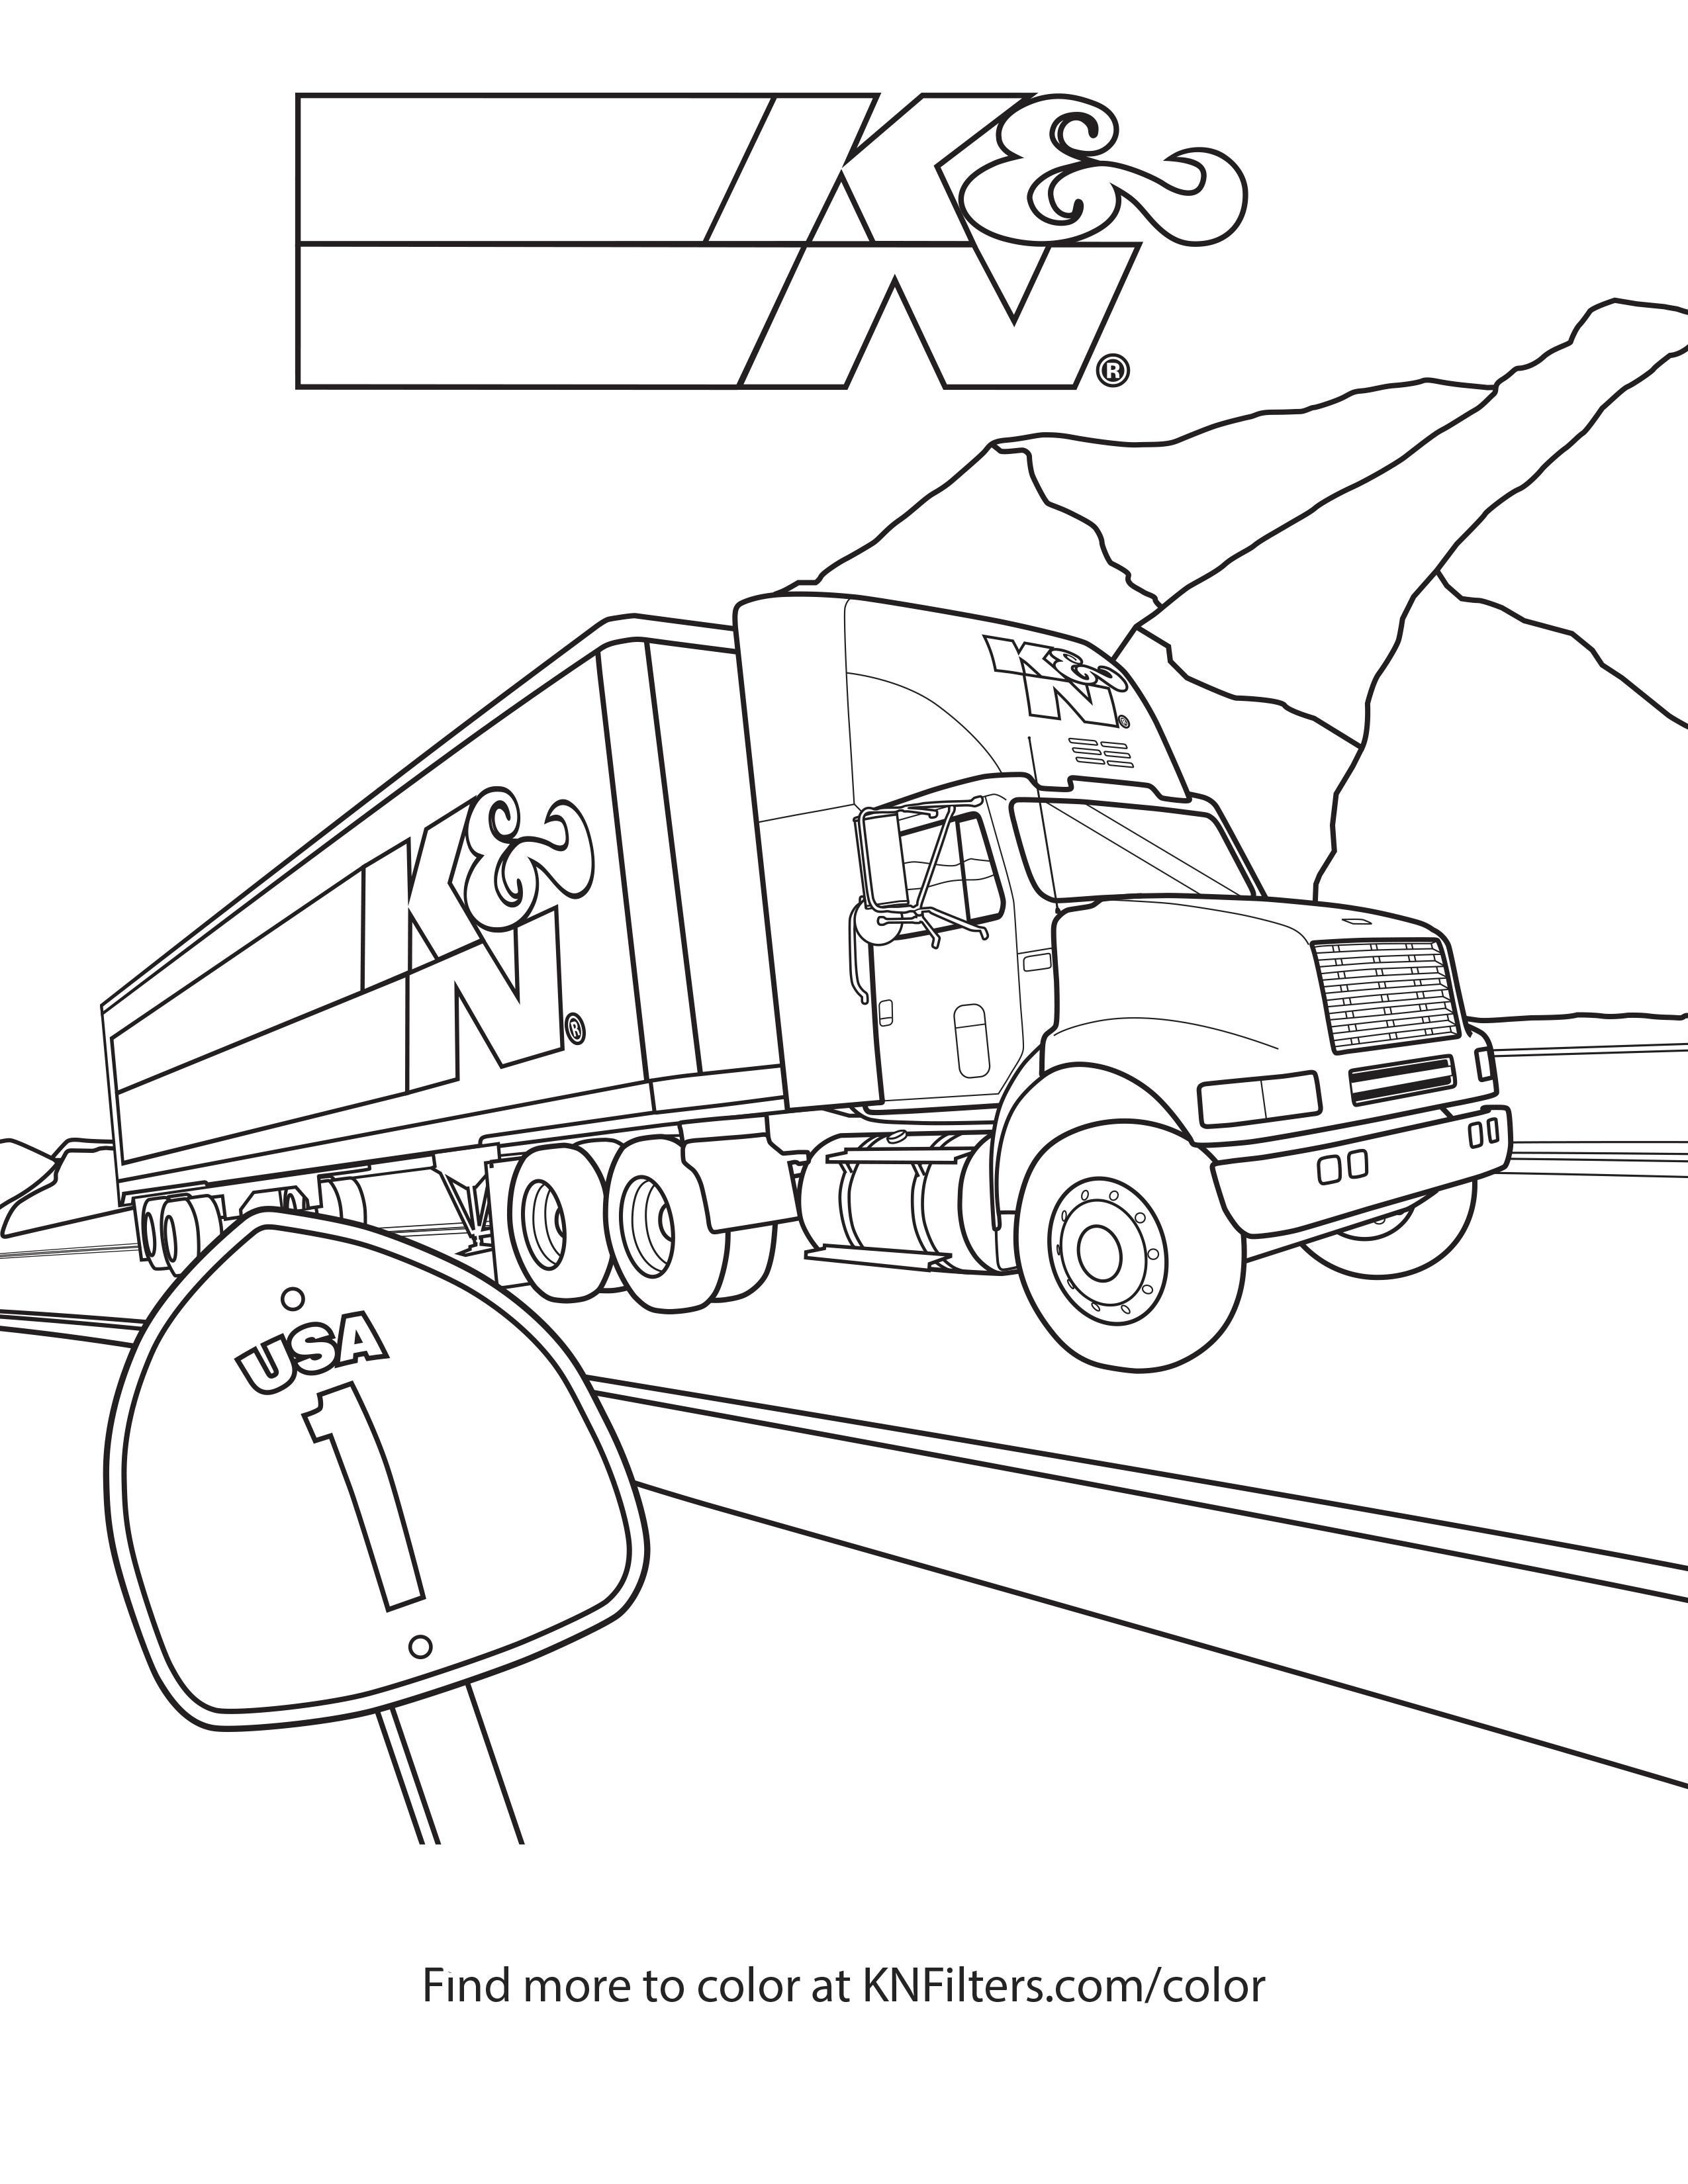 Big Truck Coloring Pages Coloring Ideas Semi Trucks Coloring Pages Advanced Big Rig Truck